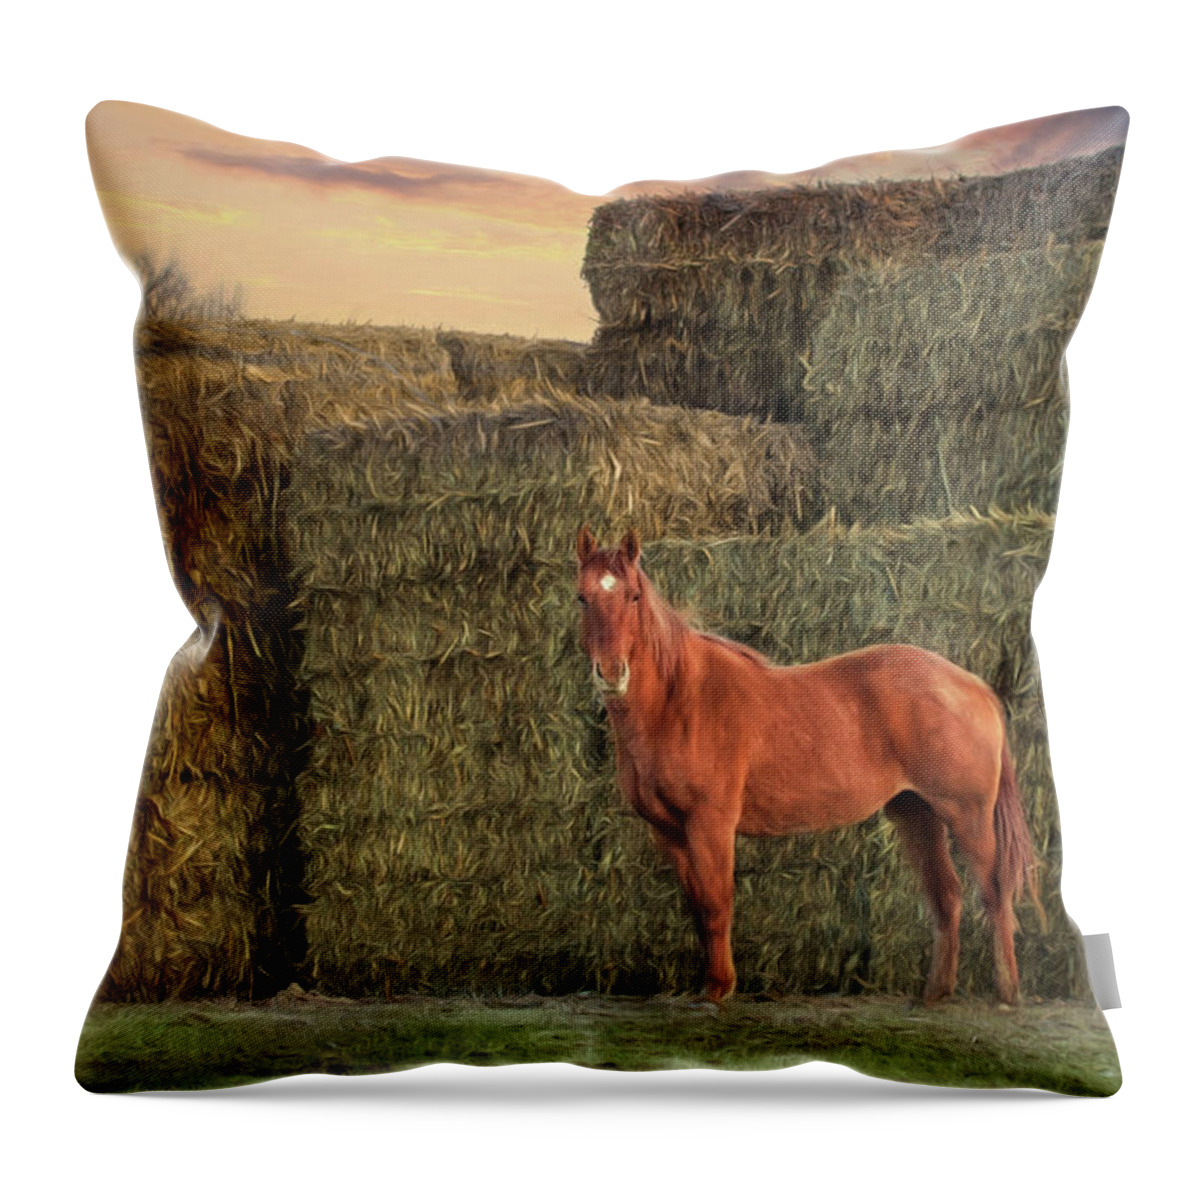 Stack Throw Pillow featuring the photograph Country Buffet by Lori Deiter